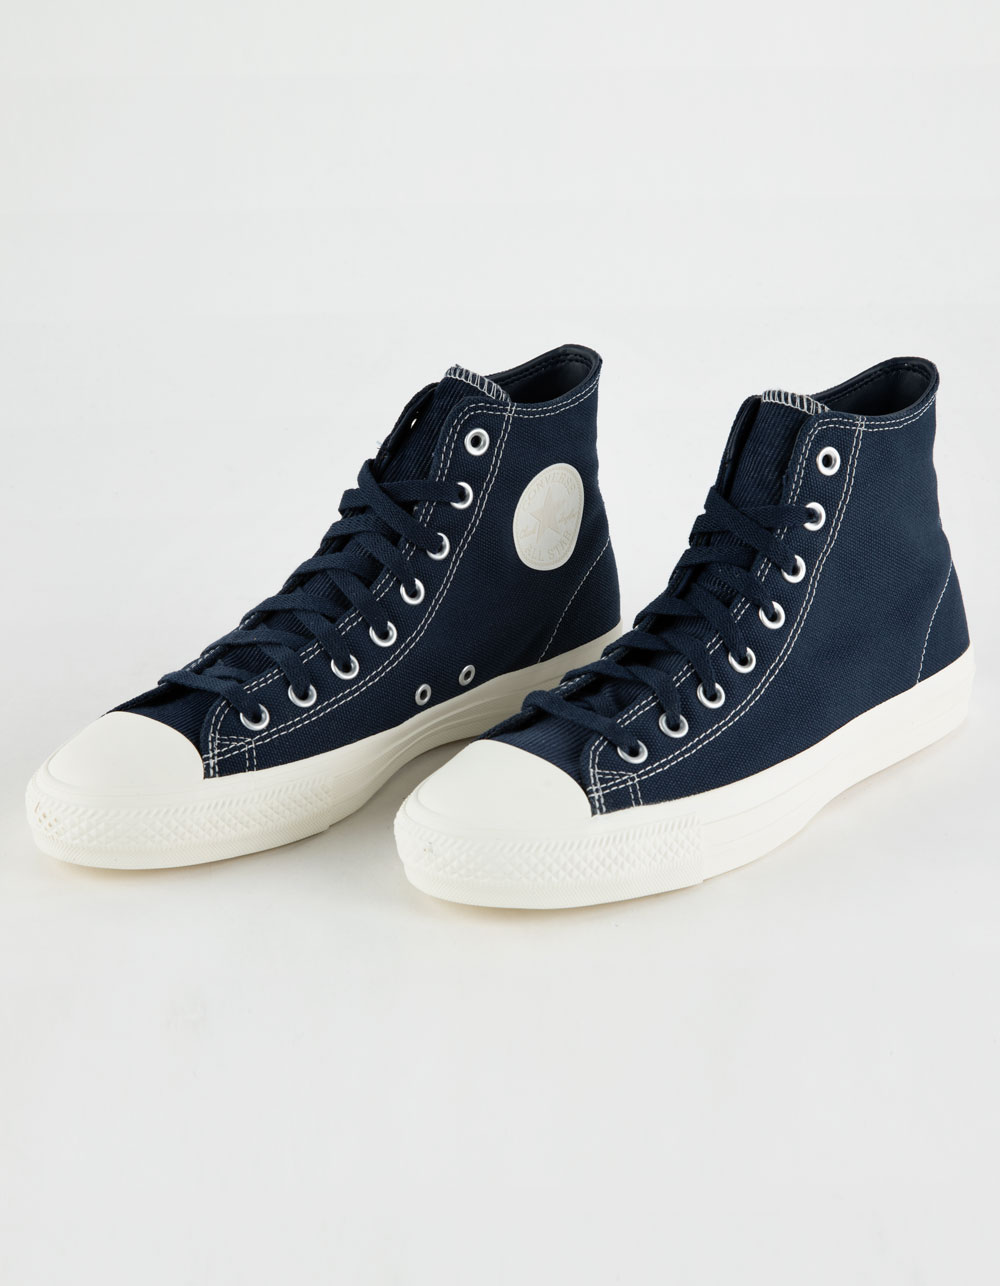 CONVERSE Chuck Taylor All Star Pro High Top Shoes - NAVY/WHITE | Tillys